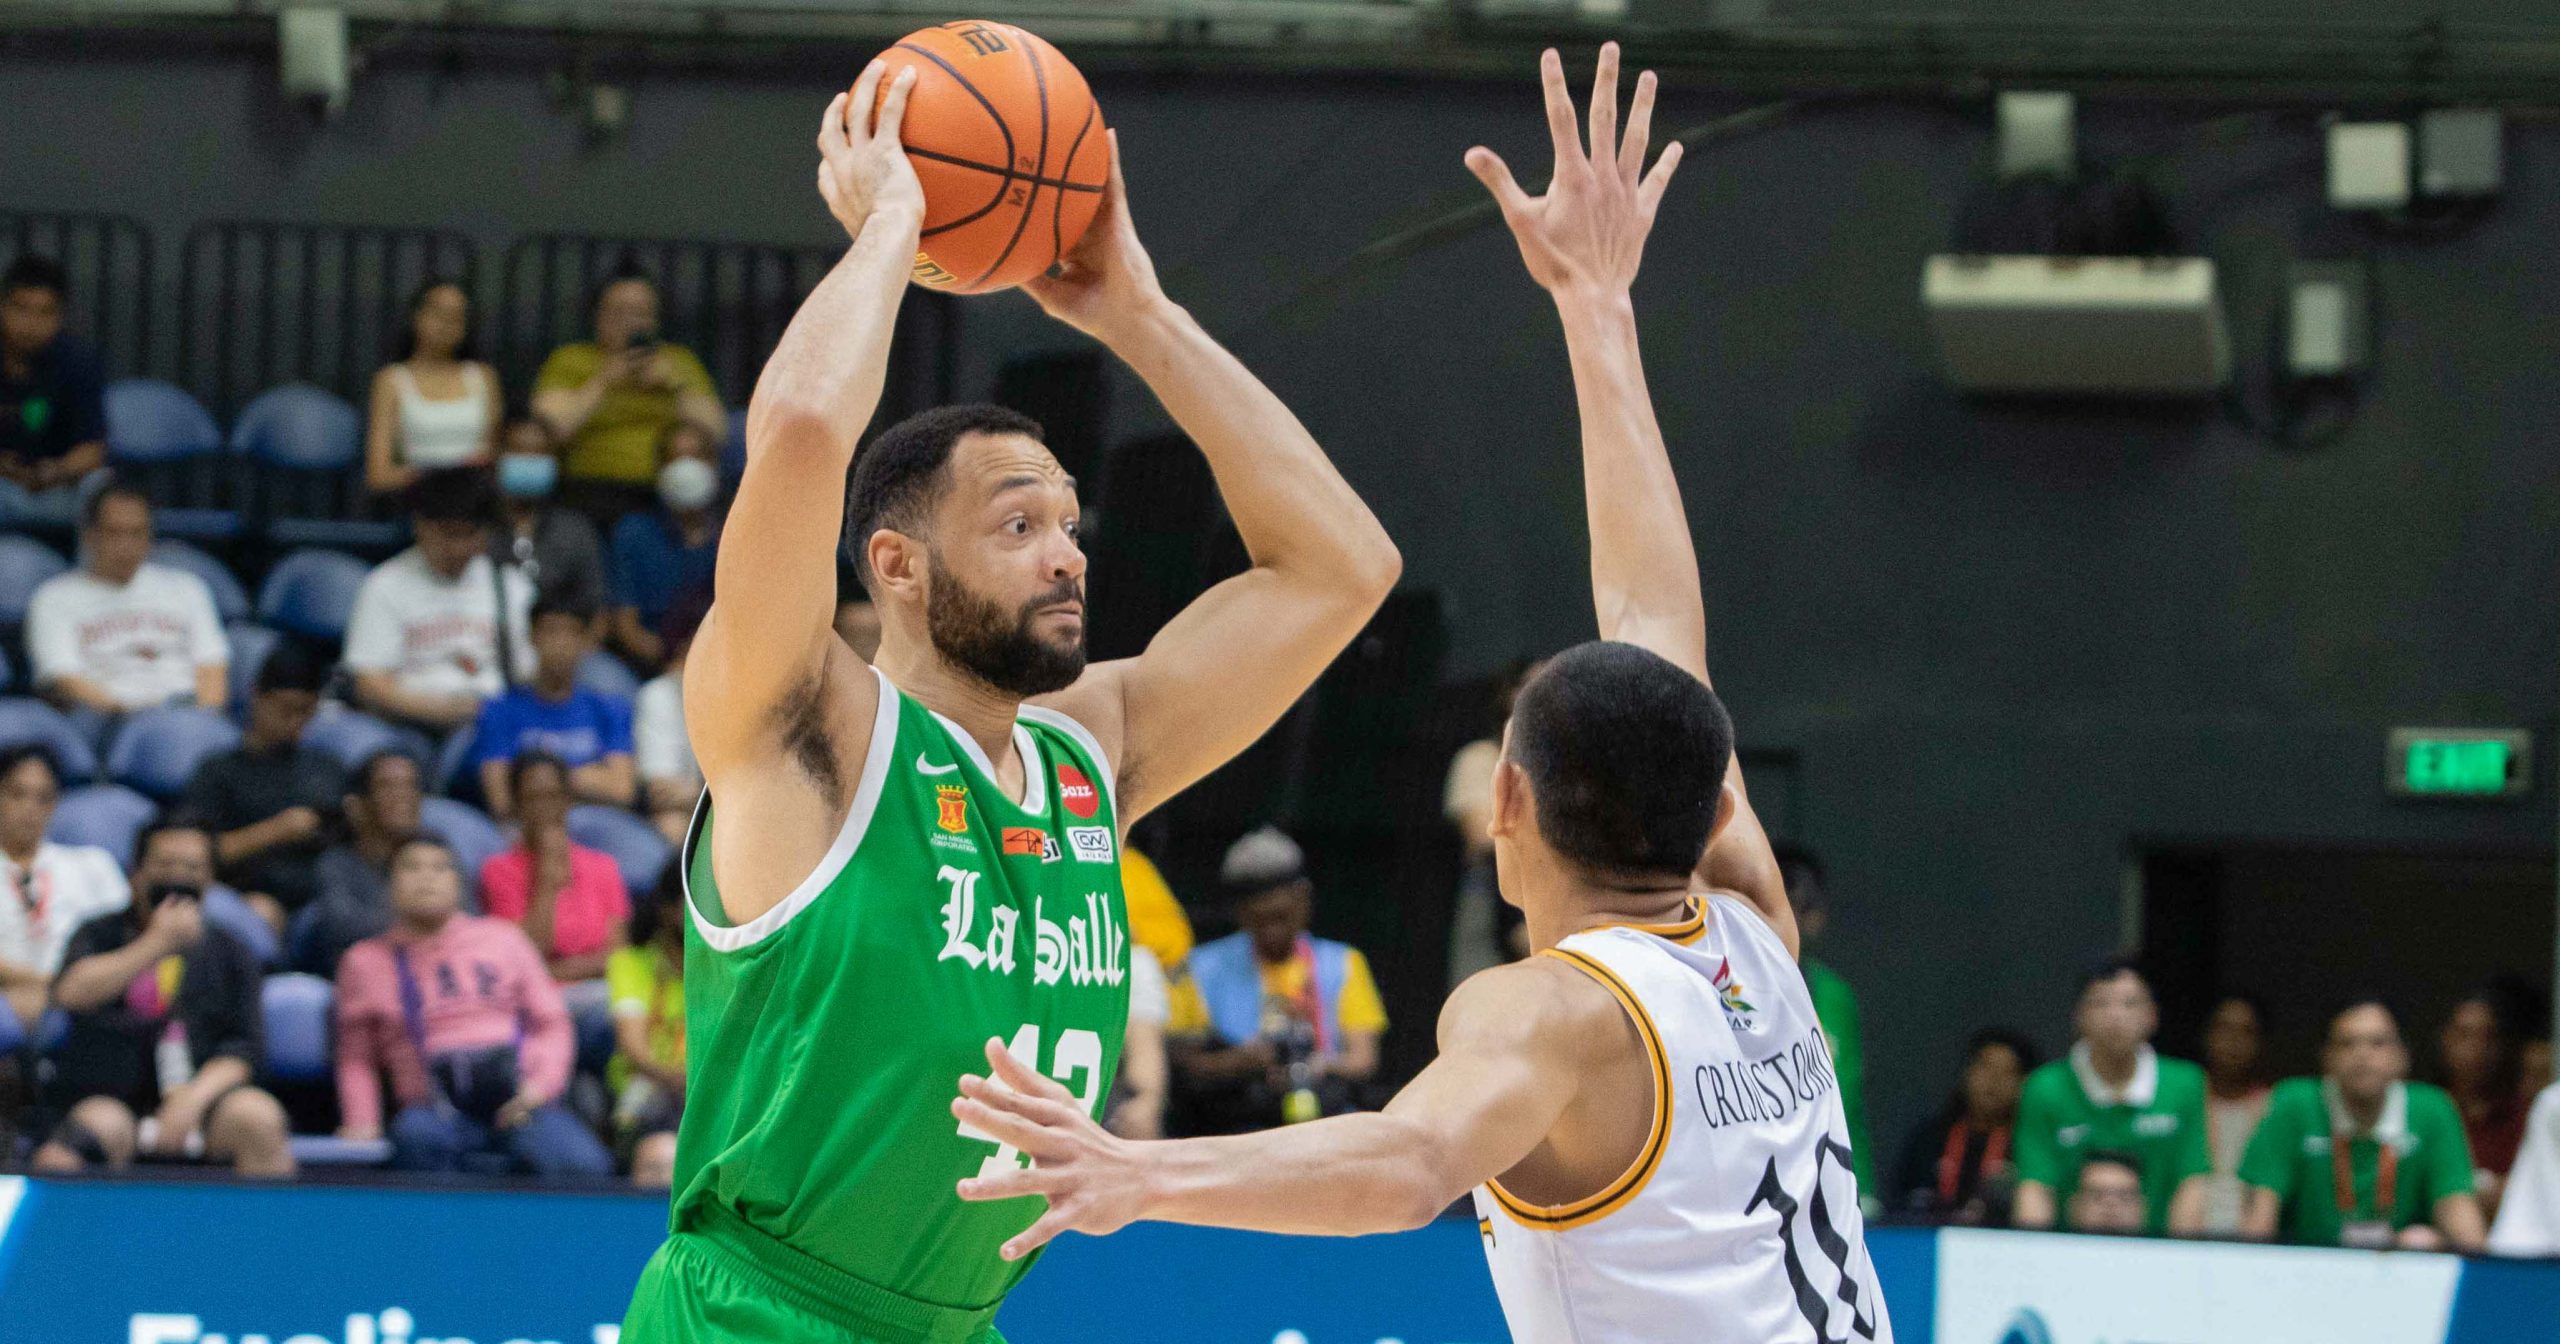 Uaap Green Archers Showcase Offensive Prowess In 91 71 Blowout Victory